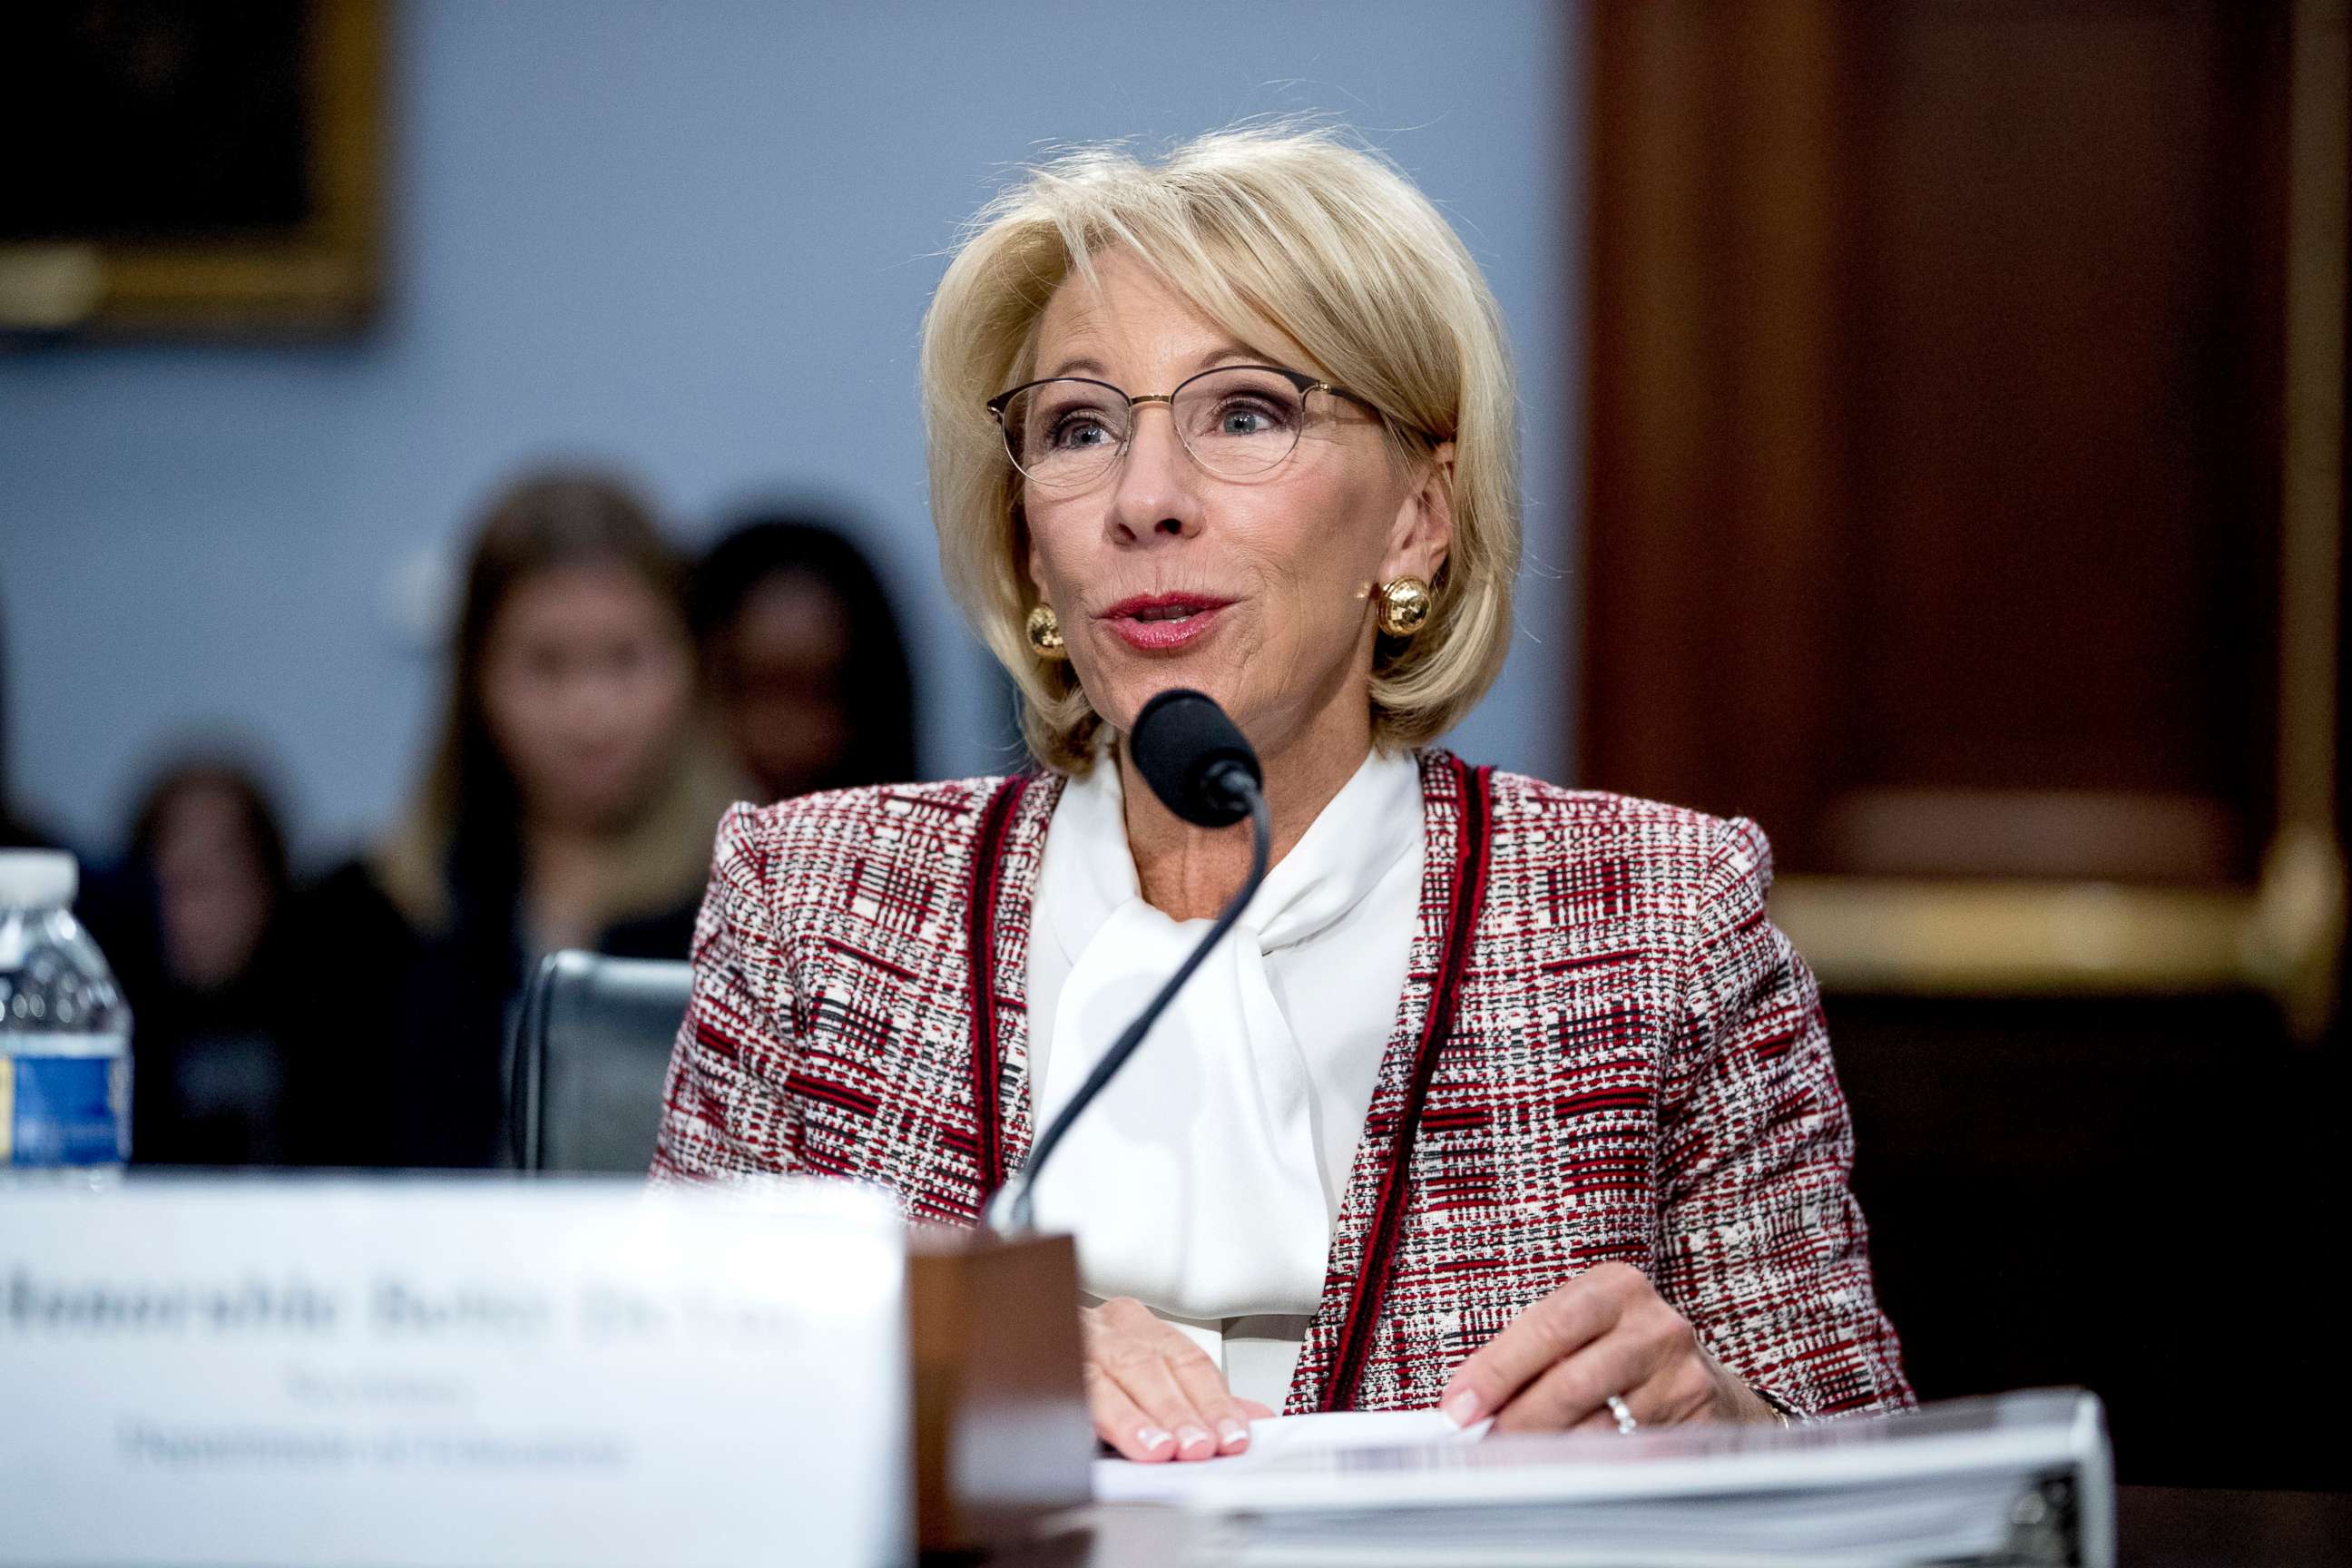 PHOTO: Education Secretary Betsy DeVos speaks during a House Appropriations subcommittee hearing on budget on Capitol Hill in Washington, March 26, 2019.